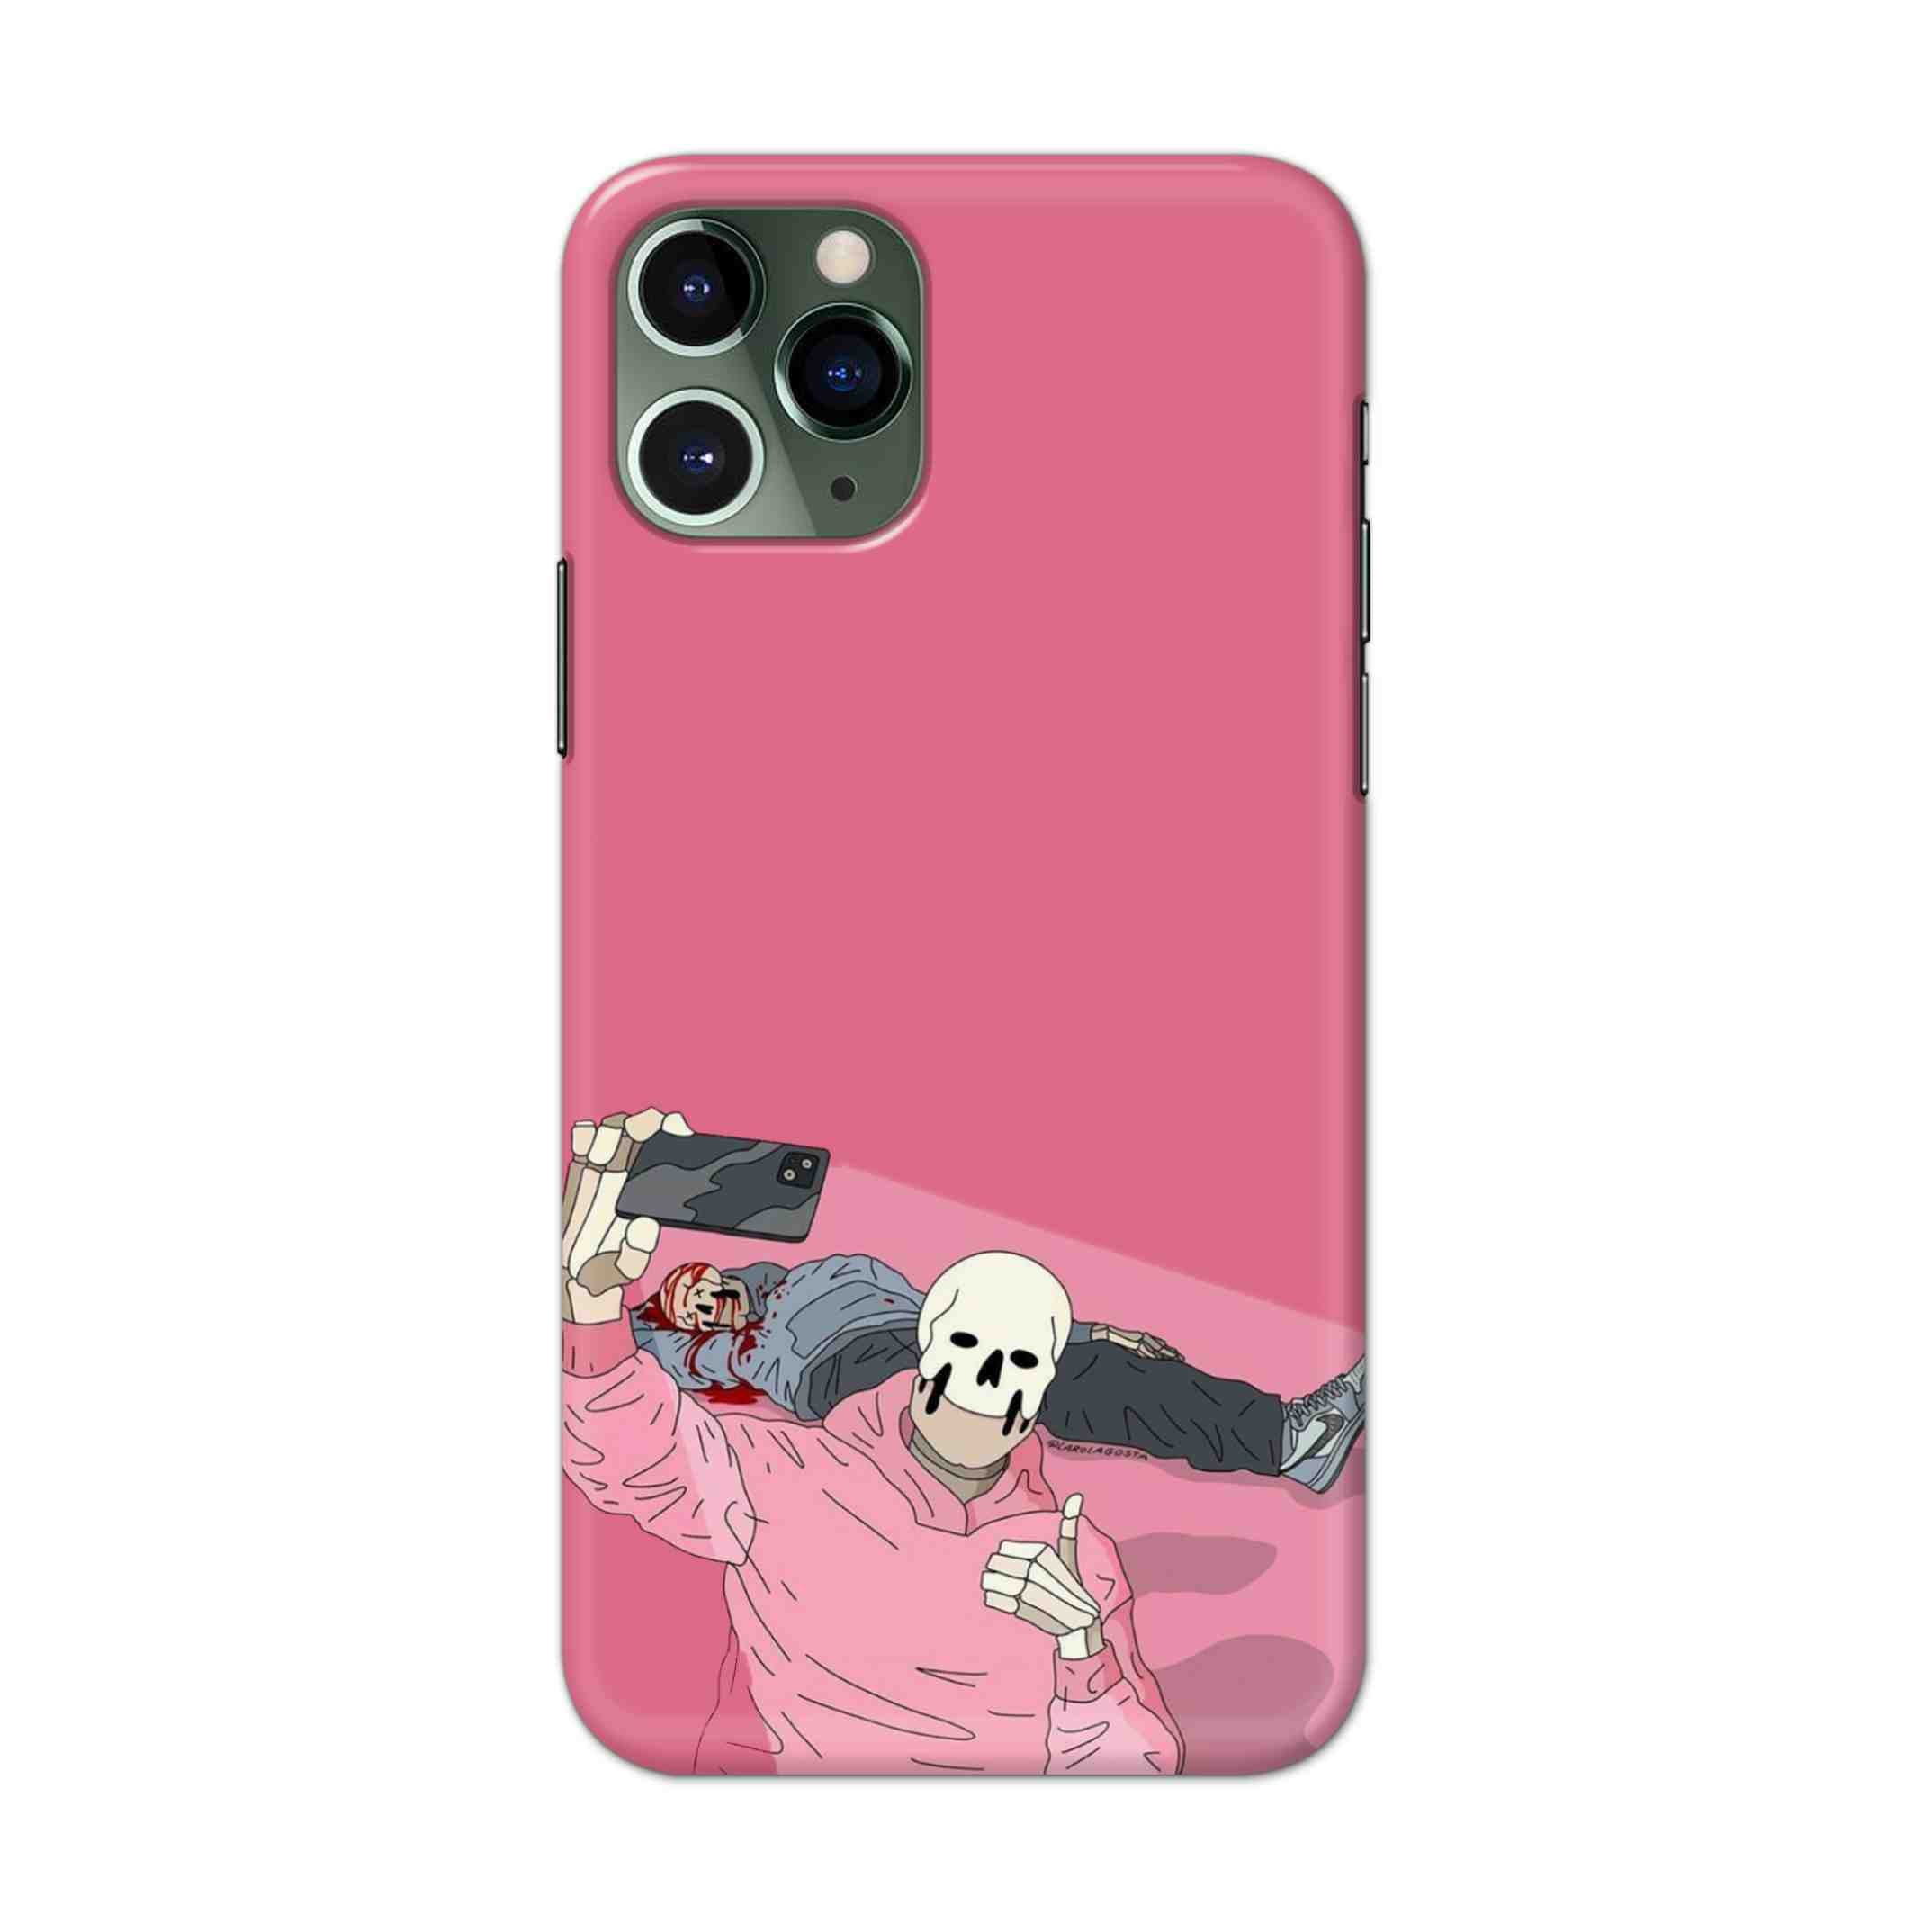 Buy Selfie Hard Back Mobile Phone Case/Cover For iPhone 11 Pro Max Online